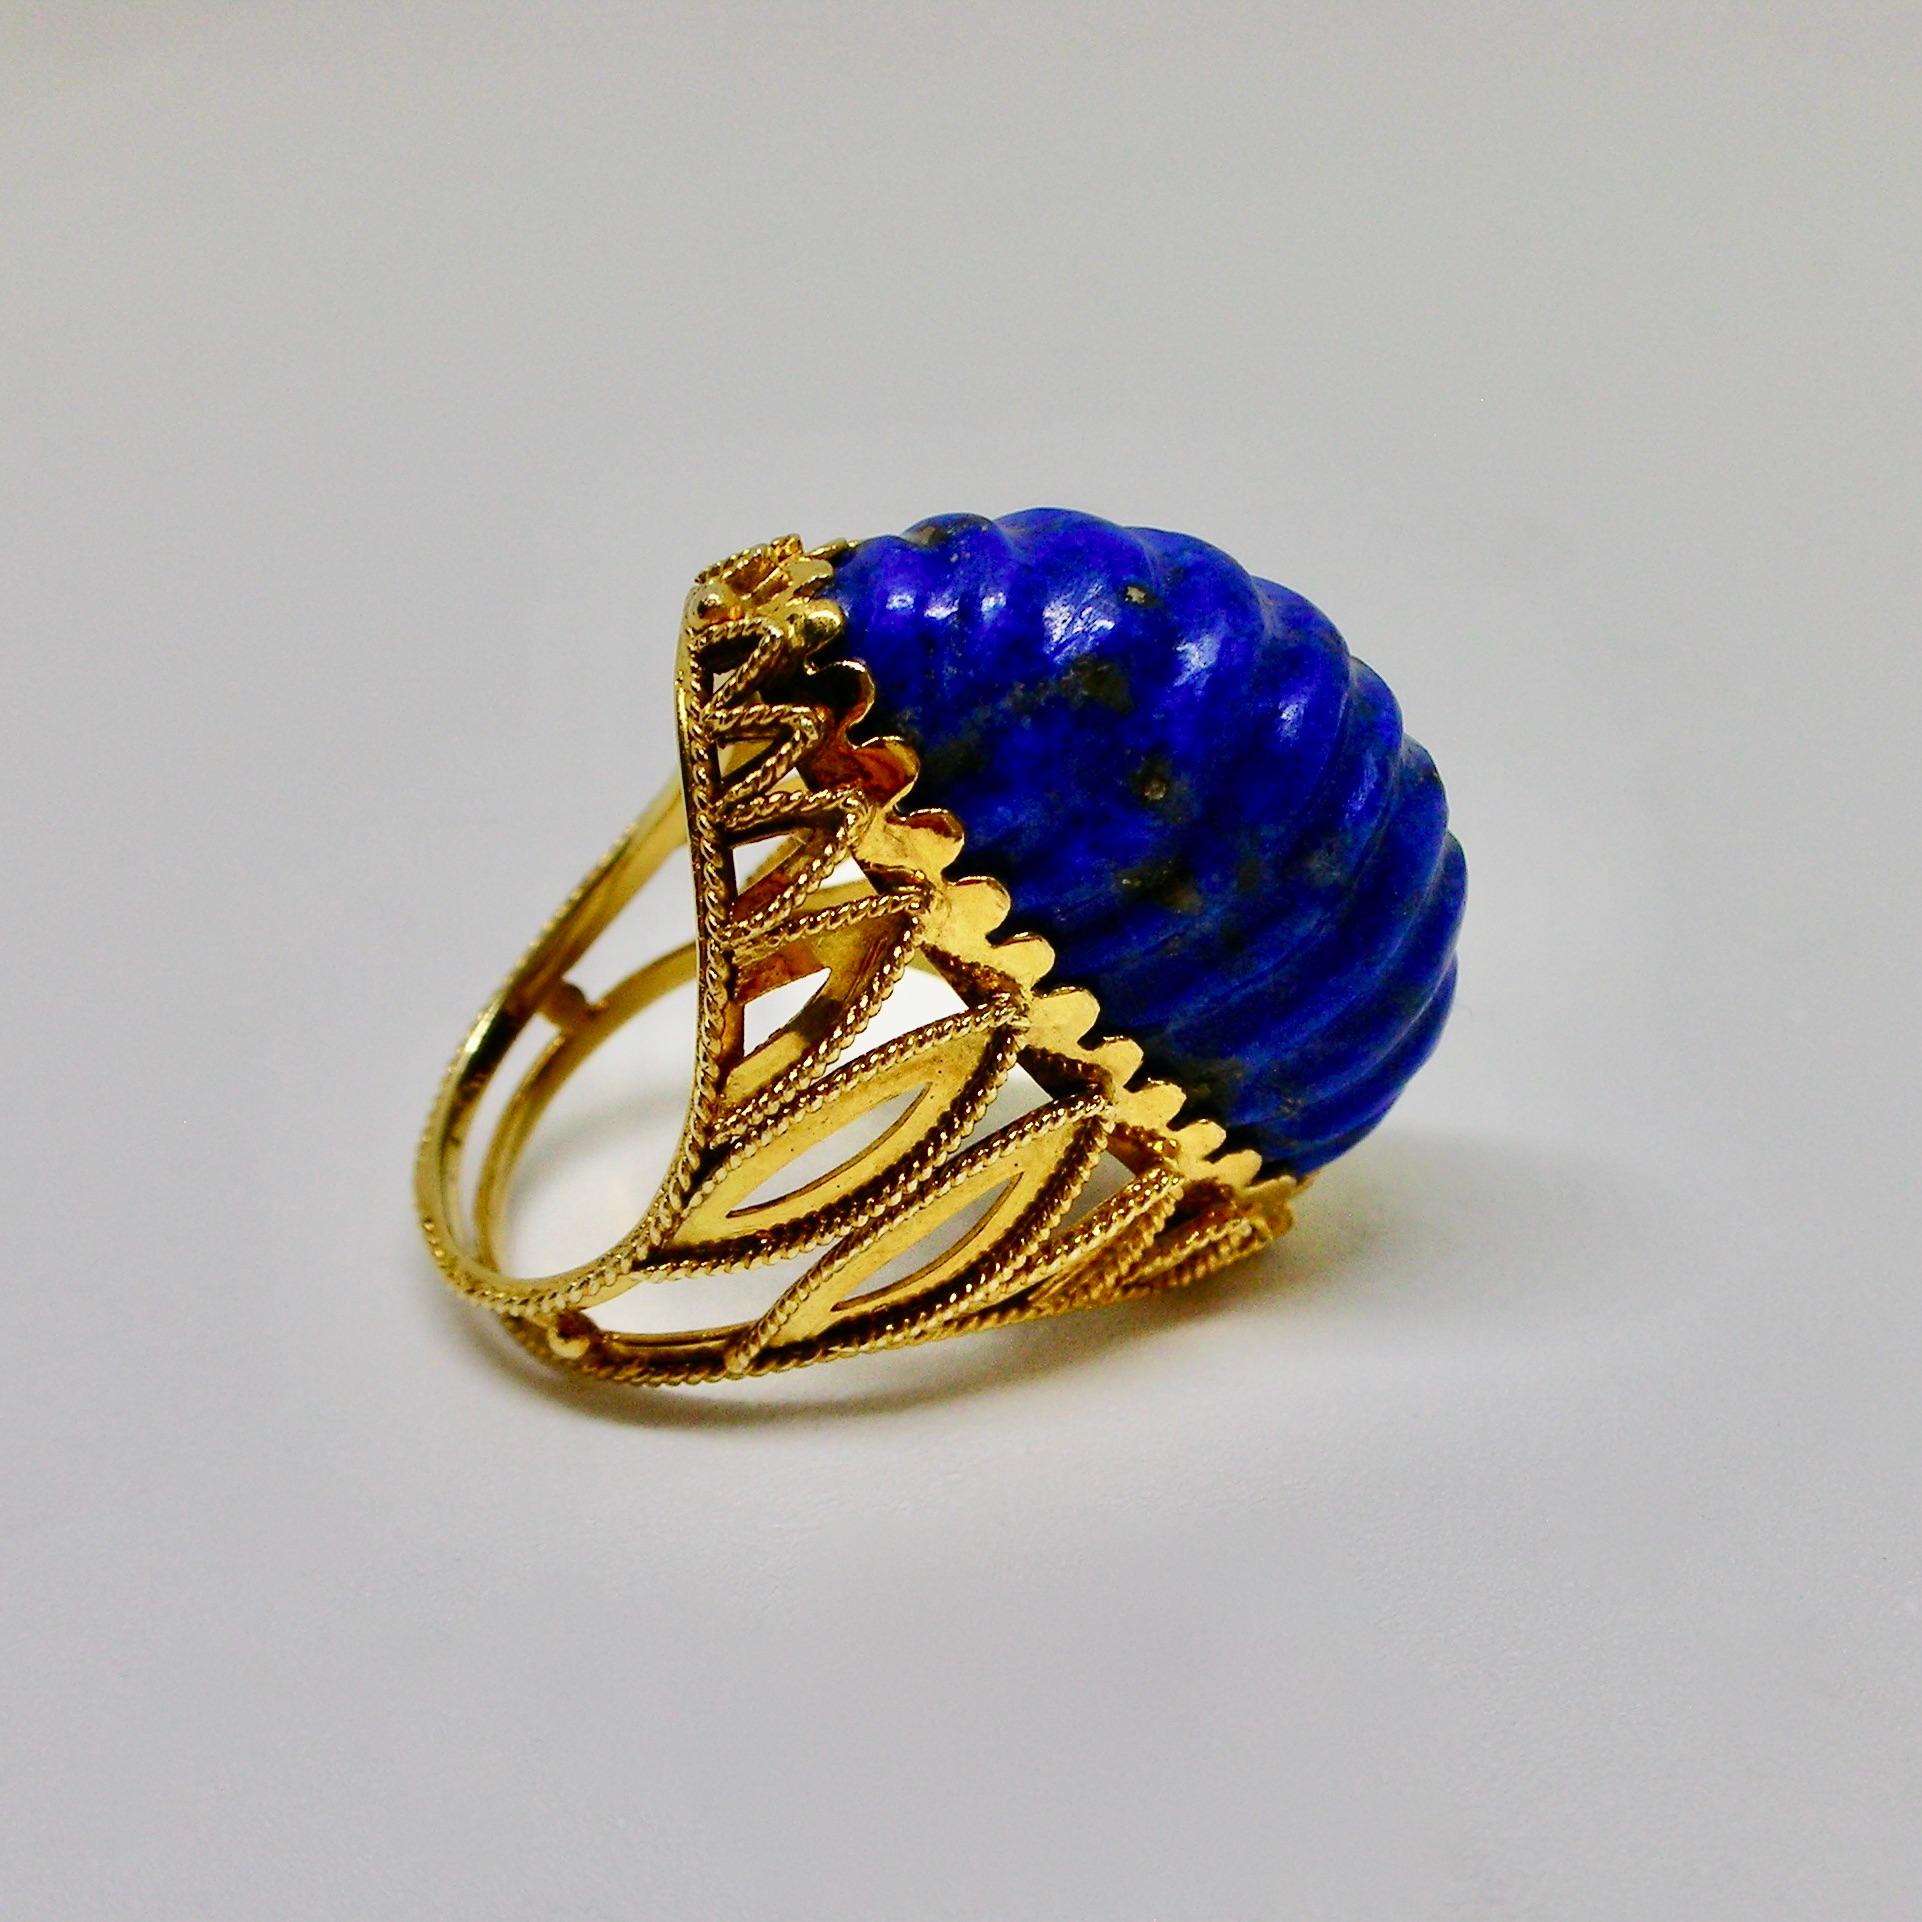 Unusual and unique cocktail ring from the 1970s period, set in 14ct gold featuring a uniquely cut and shaped lapis lazuli. This ring is of probable American provenance.

